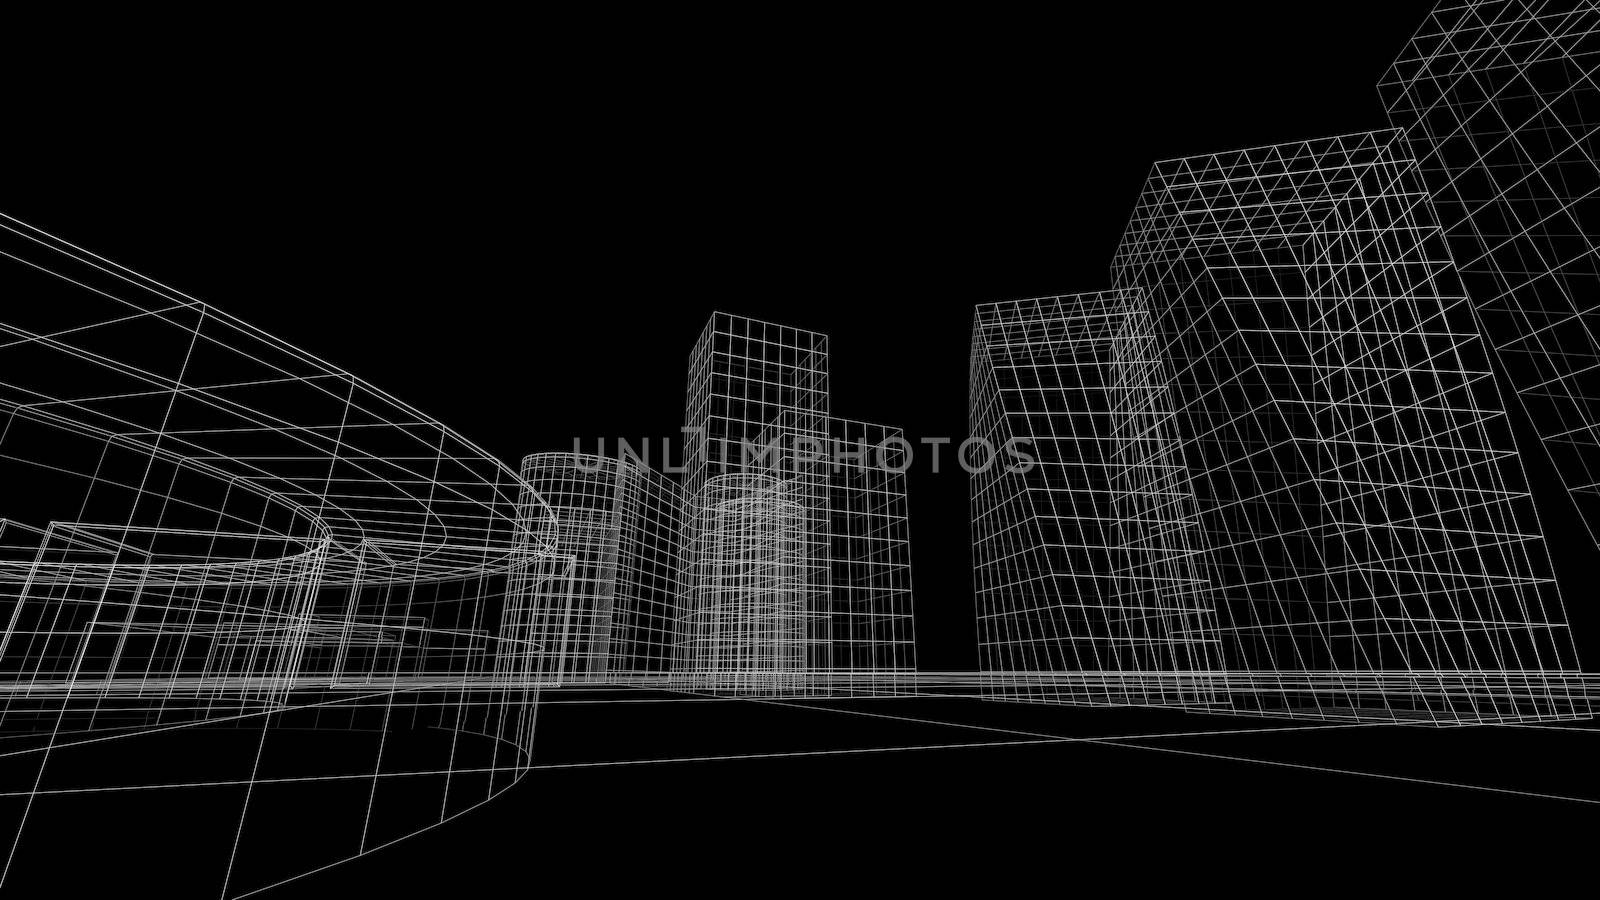 Wireframe view of some buildings with a black background by enrico.lapponi